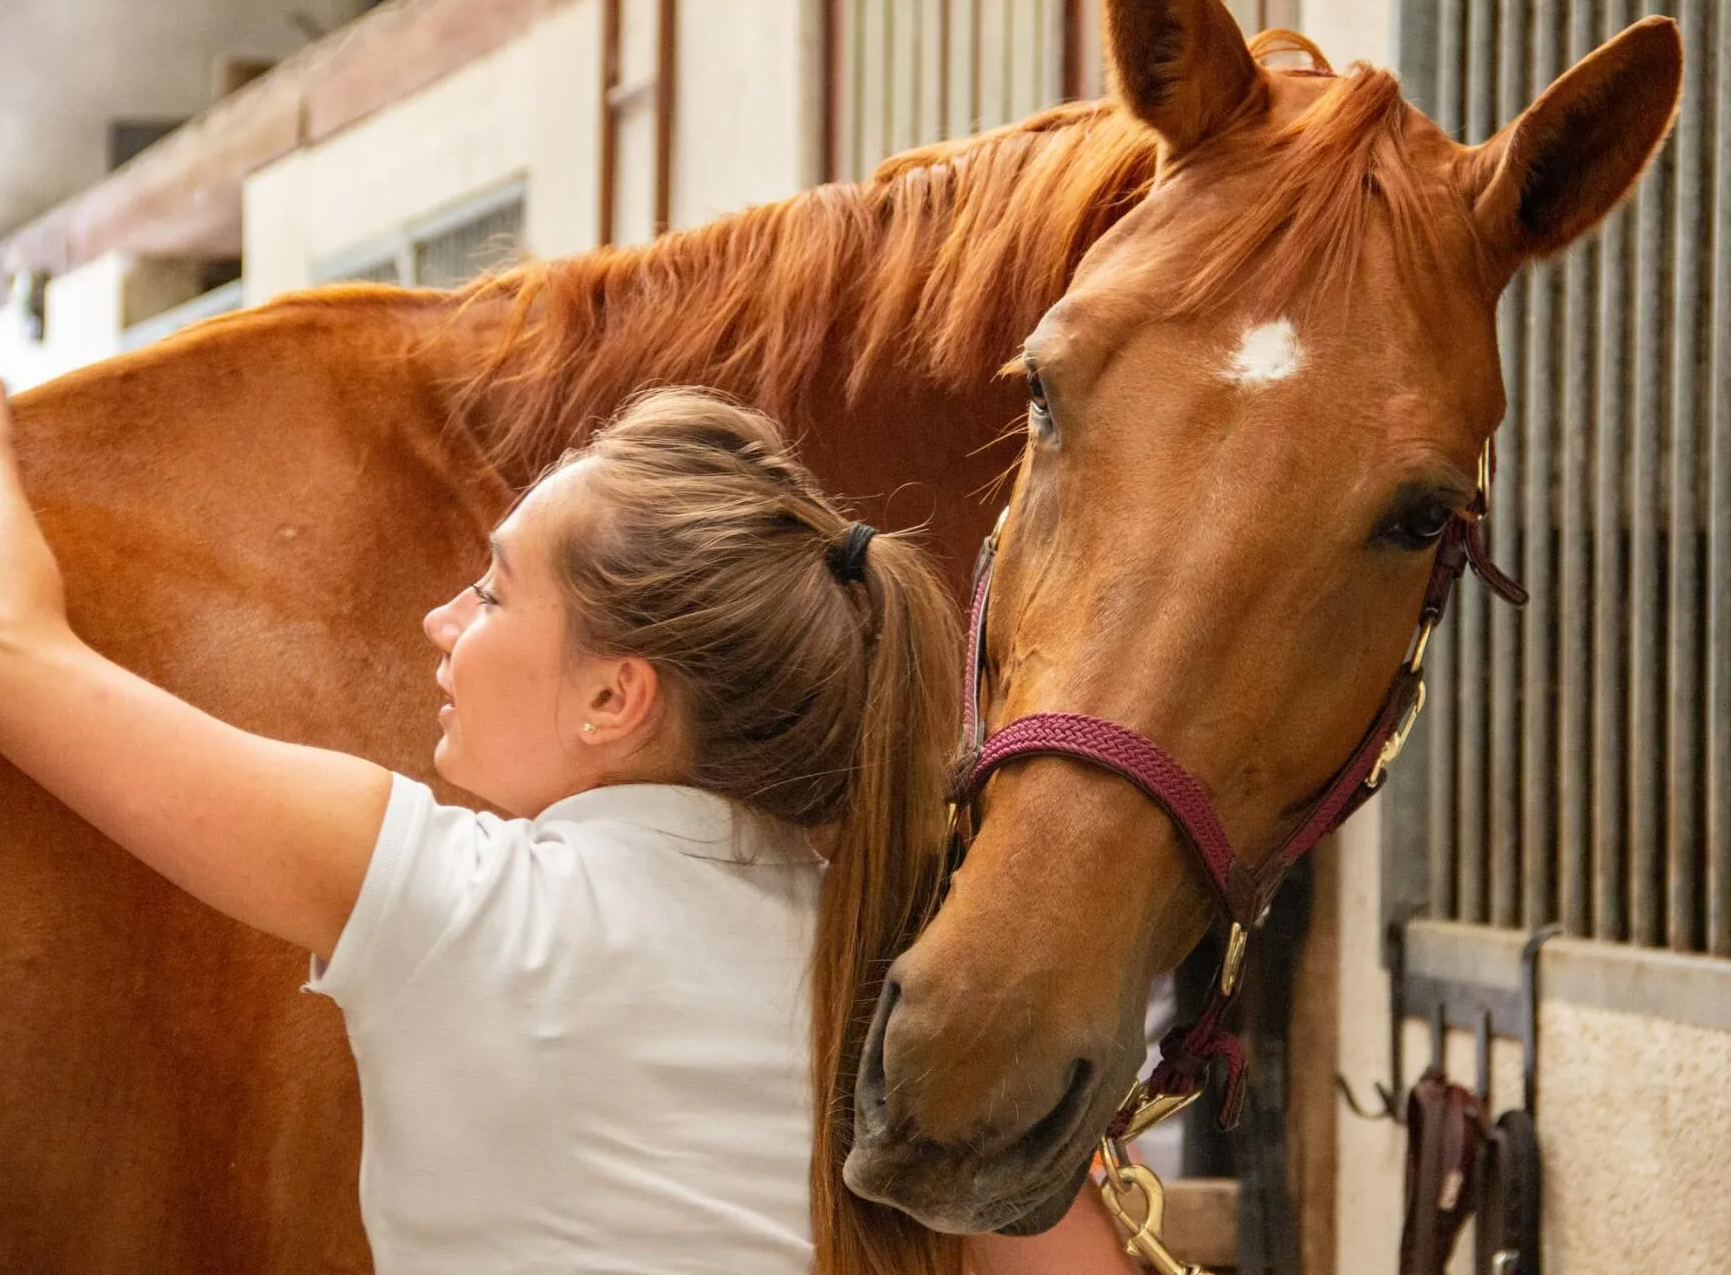 a woman in a white shirt is petting a brown horse